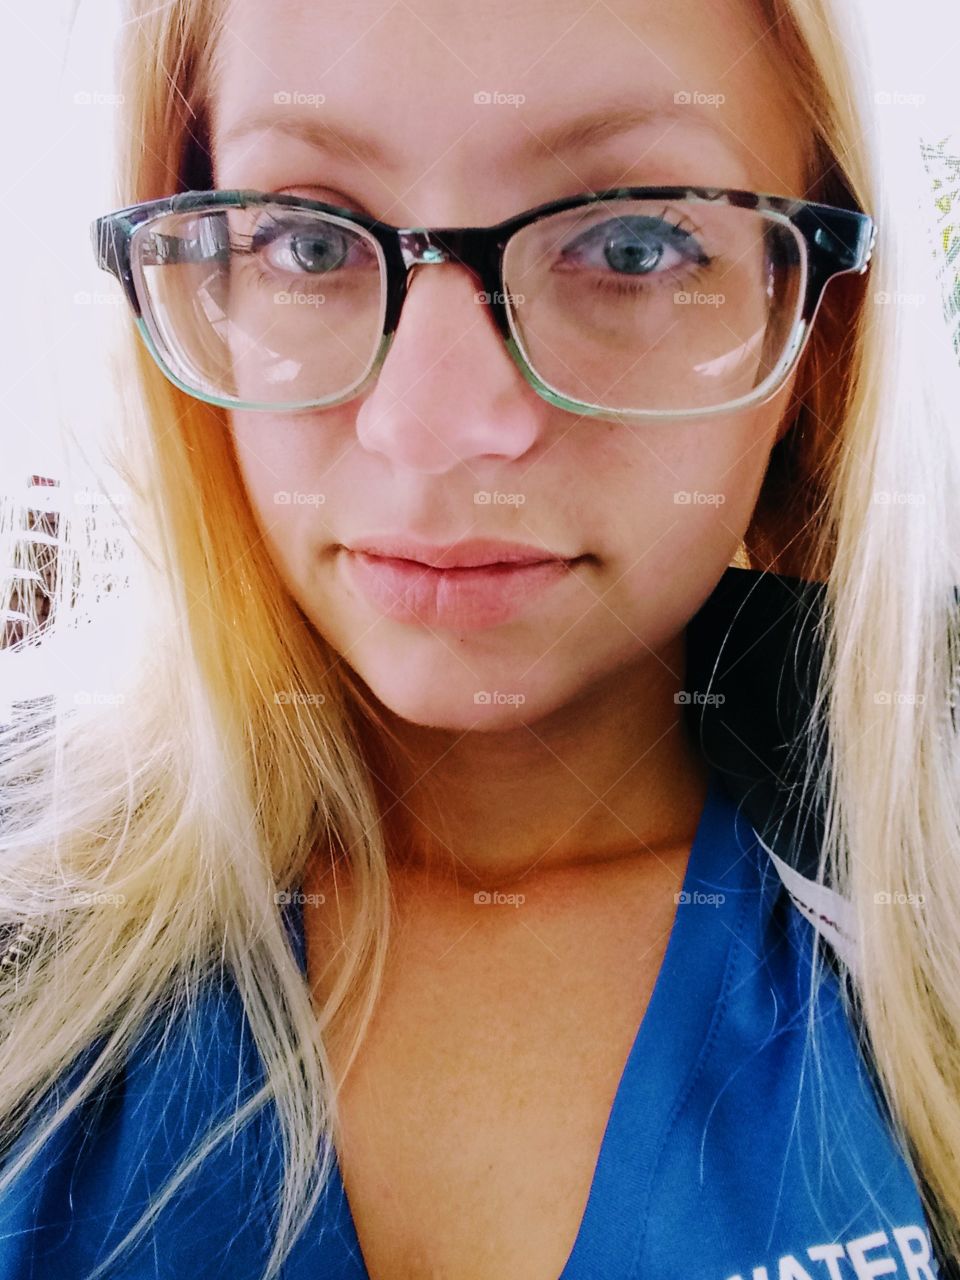 young woman with blond hair wearing glasses taking a selfie